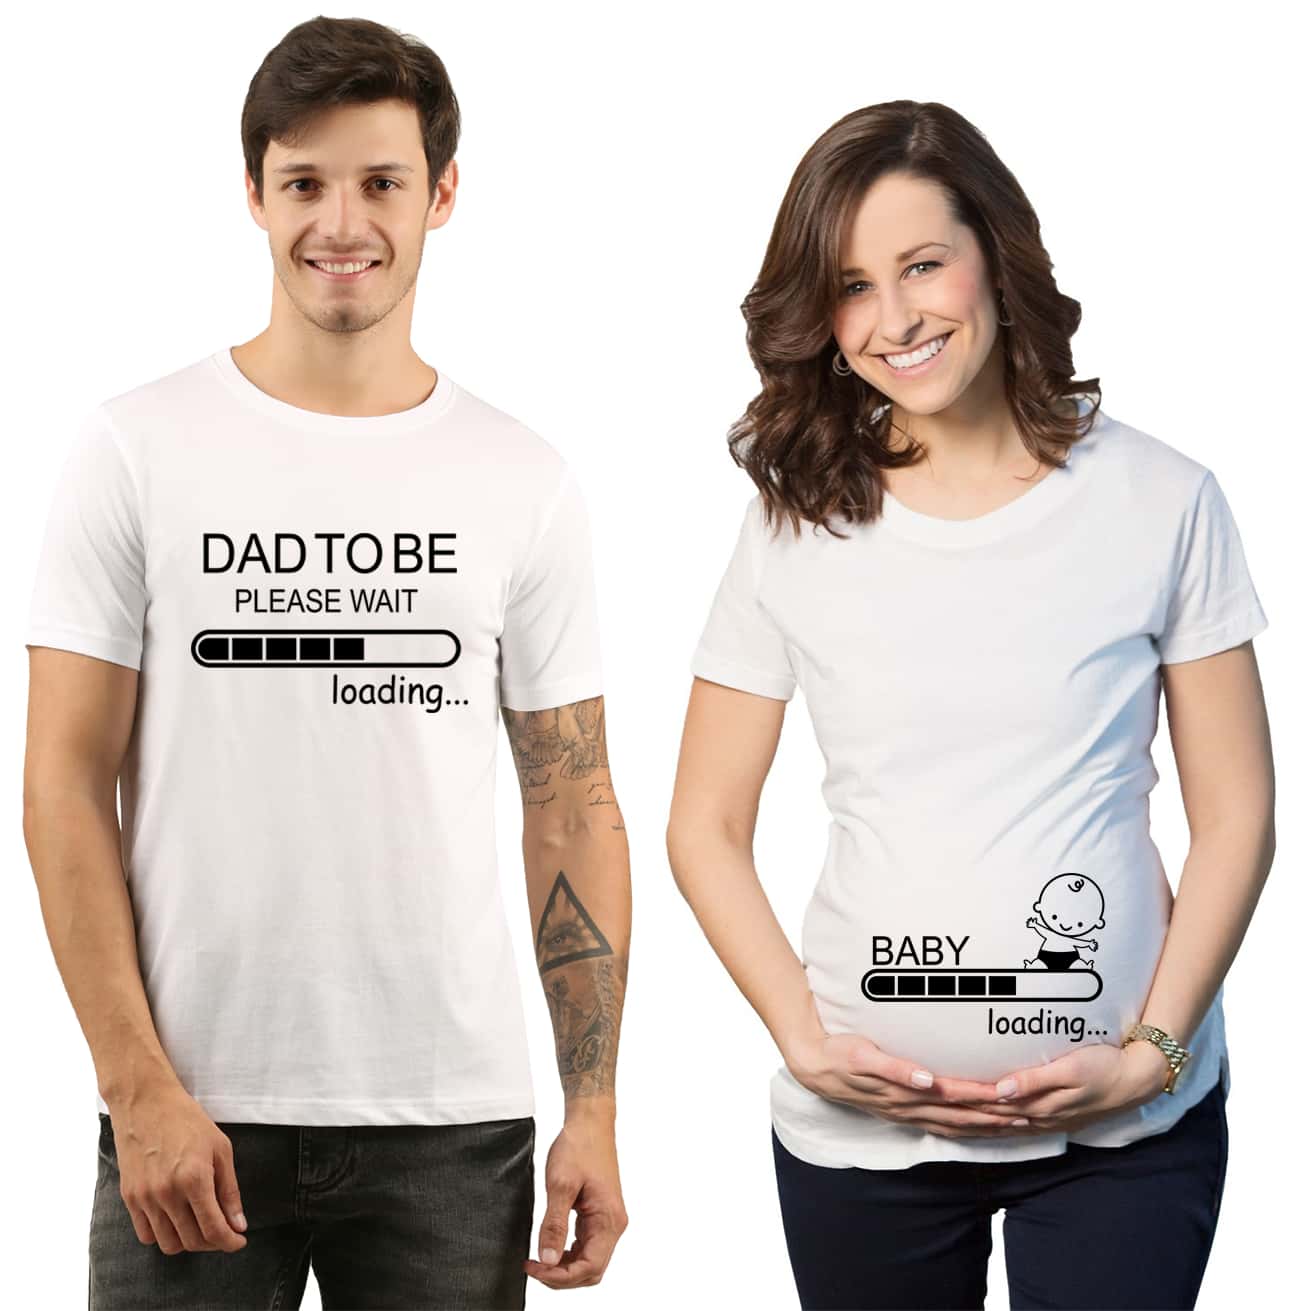 Baby Loading Pregnancy Announcement TShirts Online